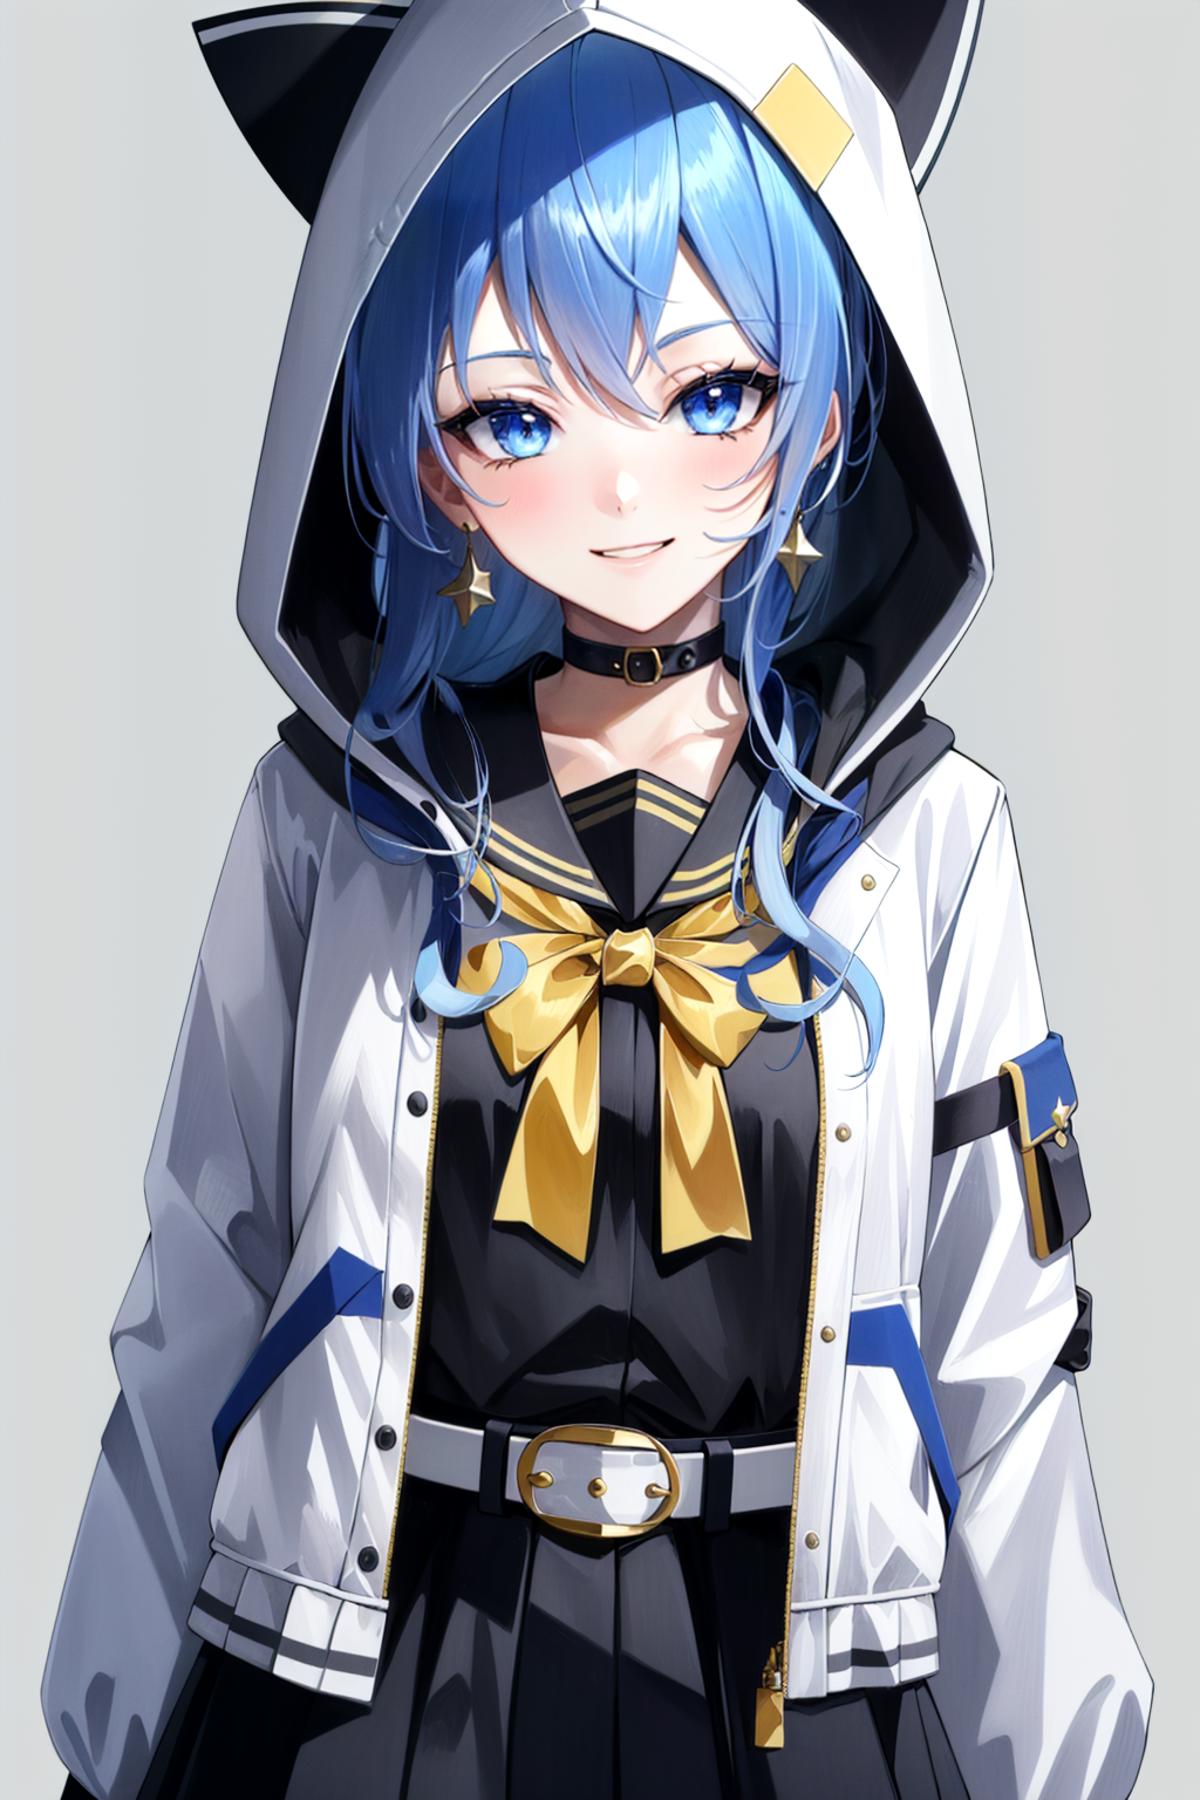 Hoshimachi Suisei (8+ Outfits) | Hololive image by Pitpe11